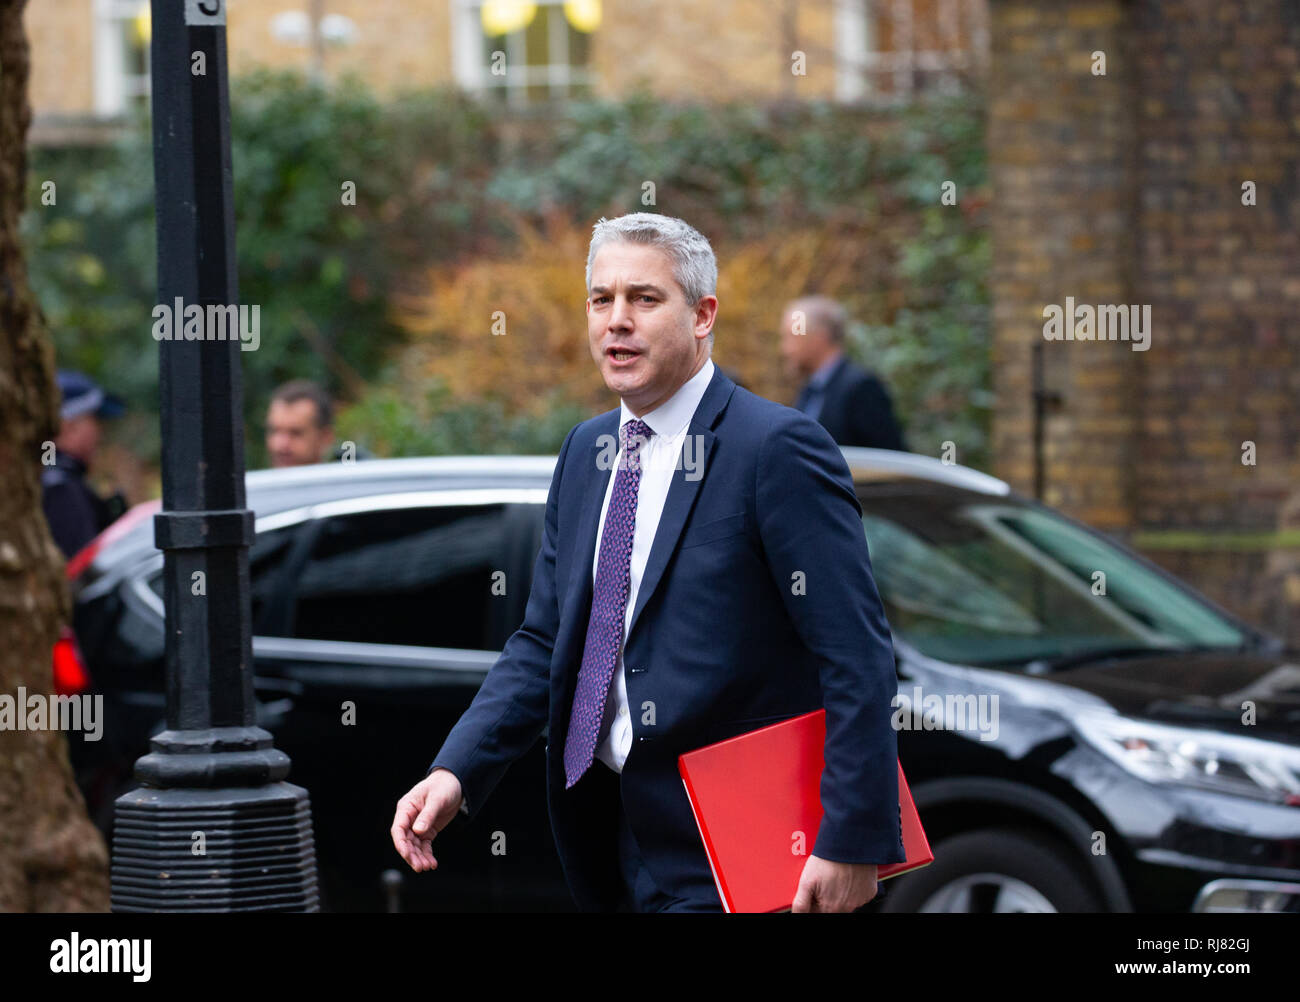 London, UK. 05th Feb, 2019. Stephen Barclay, Secretary of State for Exiting the European Union, arrives for the Cabinet Meeting. Credit: Tommy London/Alamy Live News Stock Photo